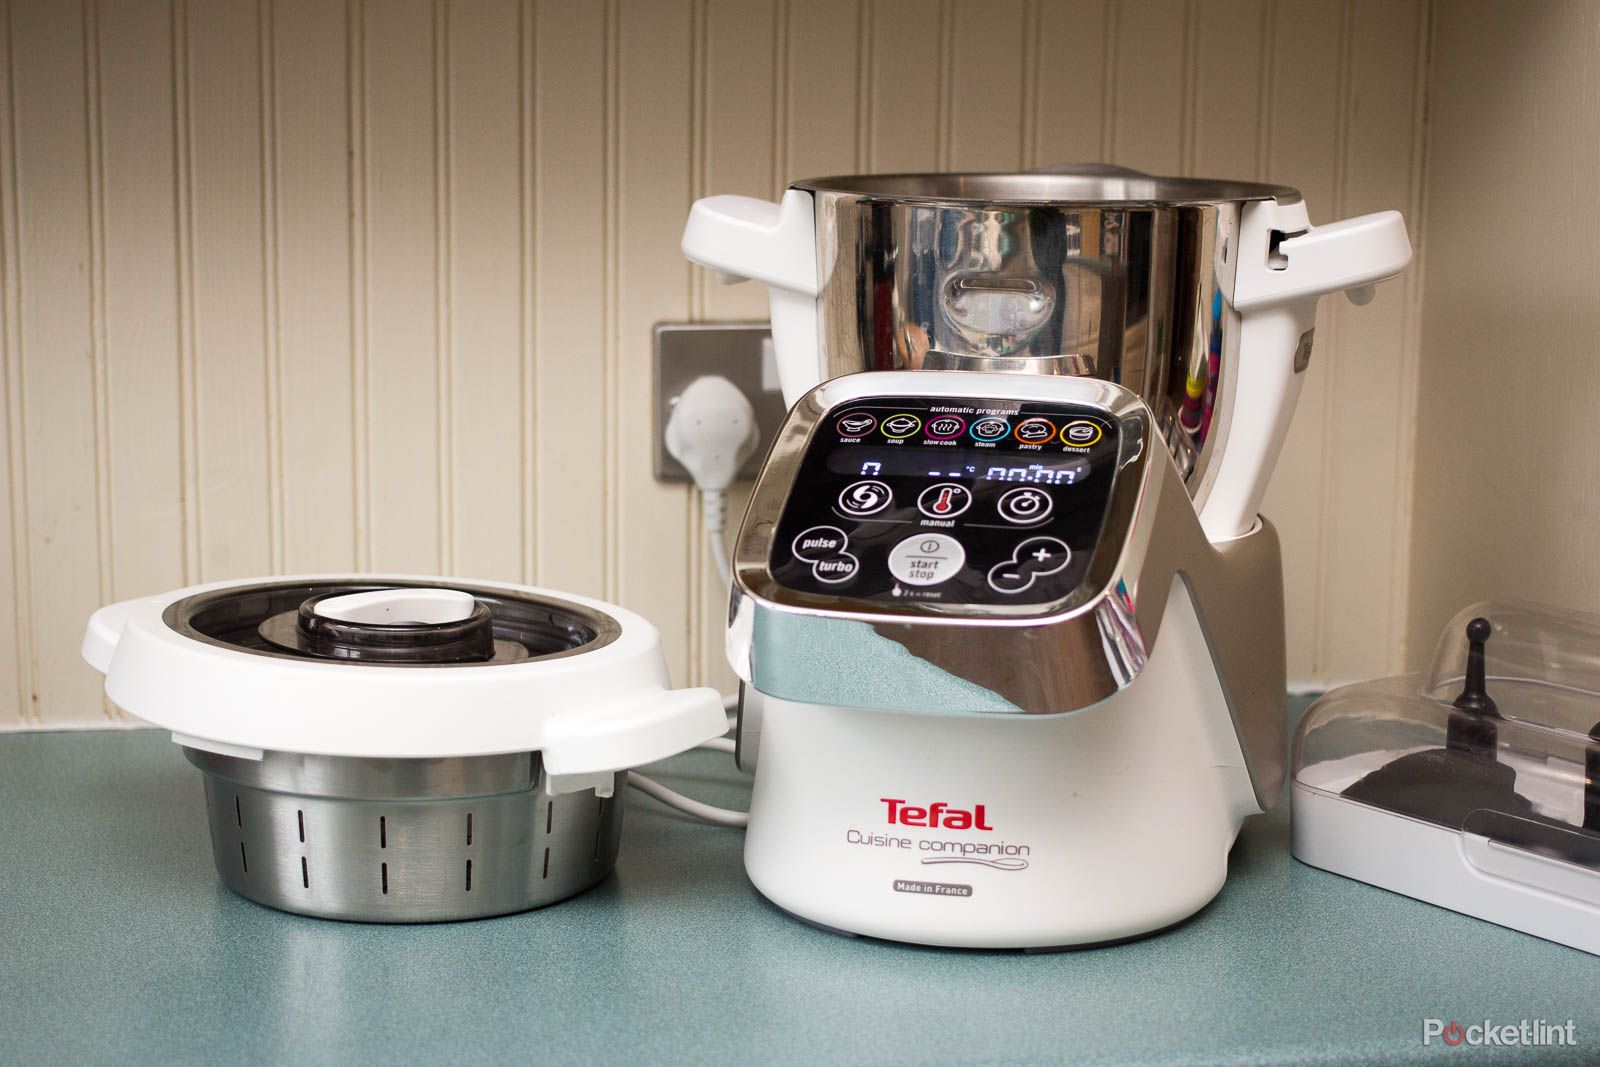 tefal cuisine companion takes on thermomix but can it deliver image 1